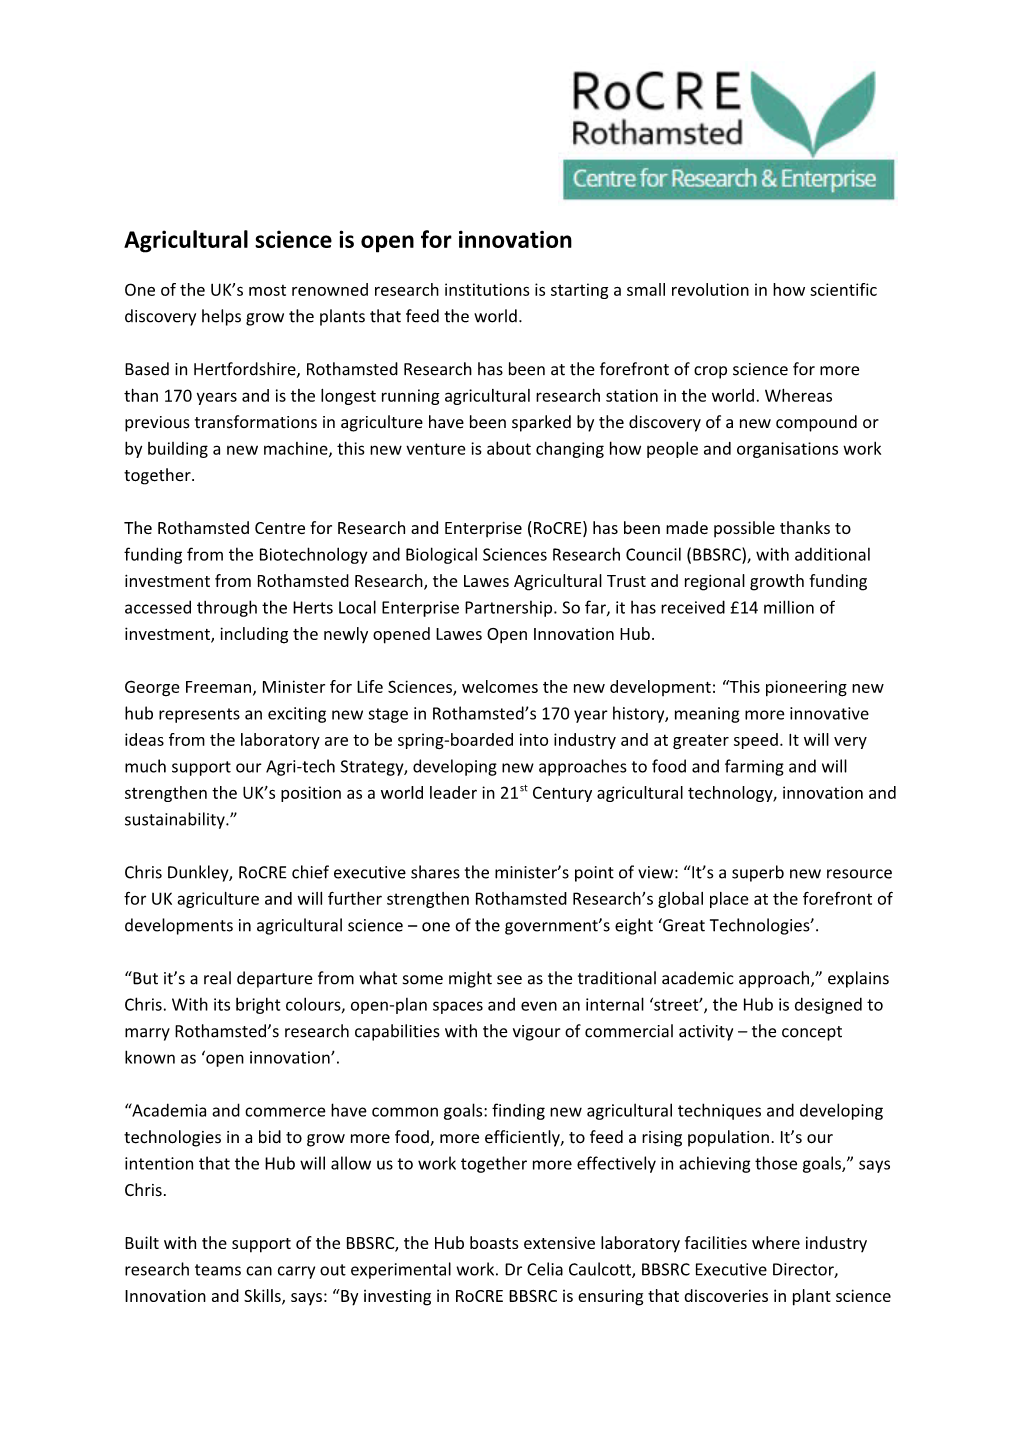 Agricultural Science Is Open for Innovation